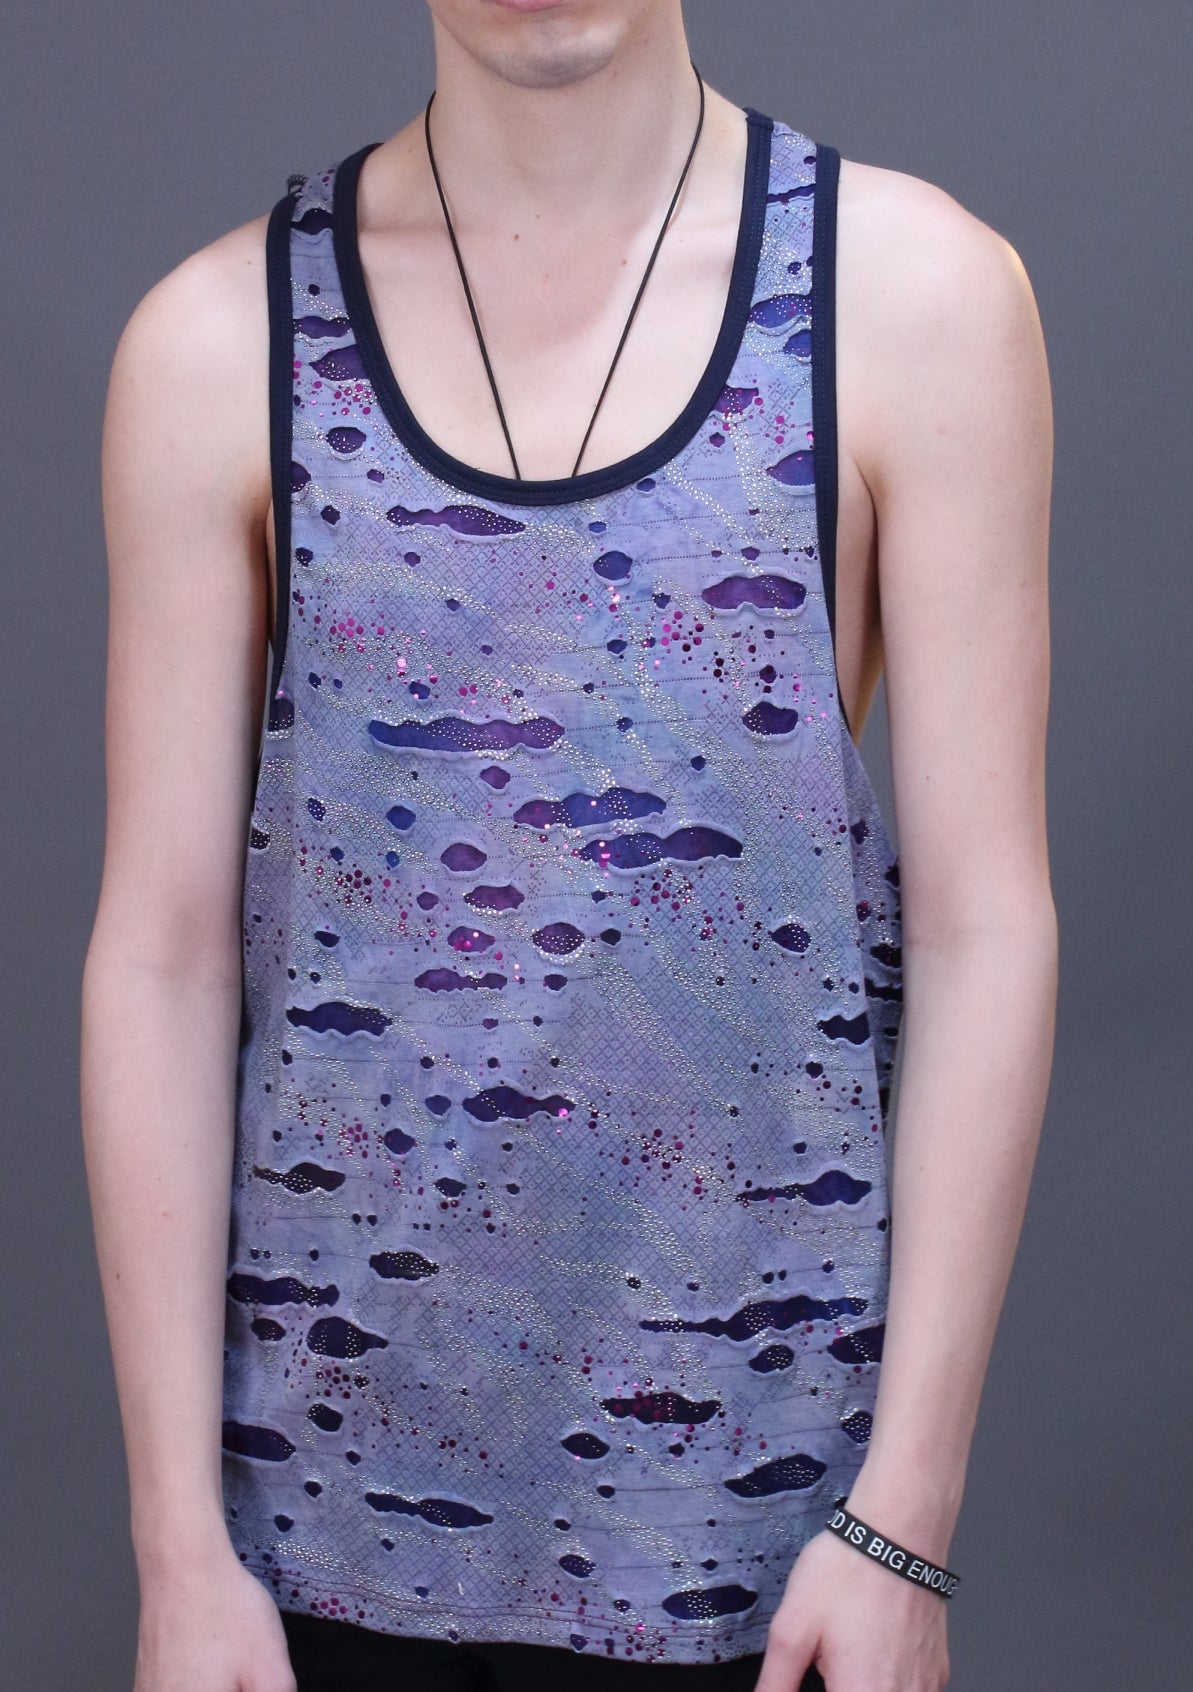 Distressed tank by Mission